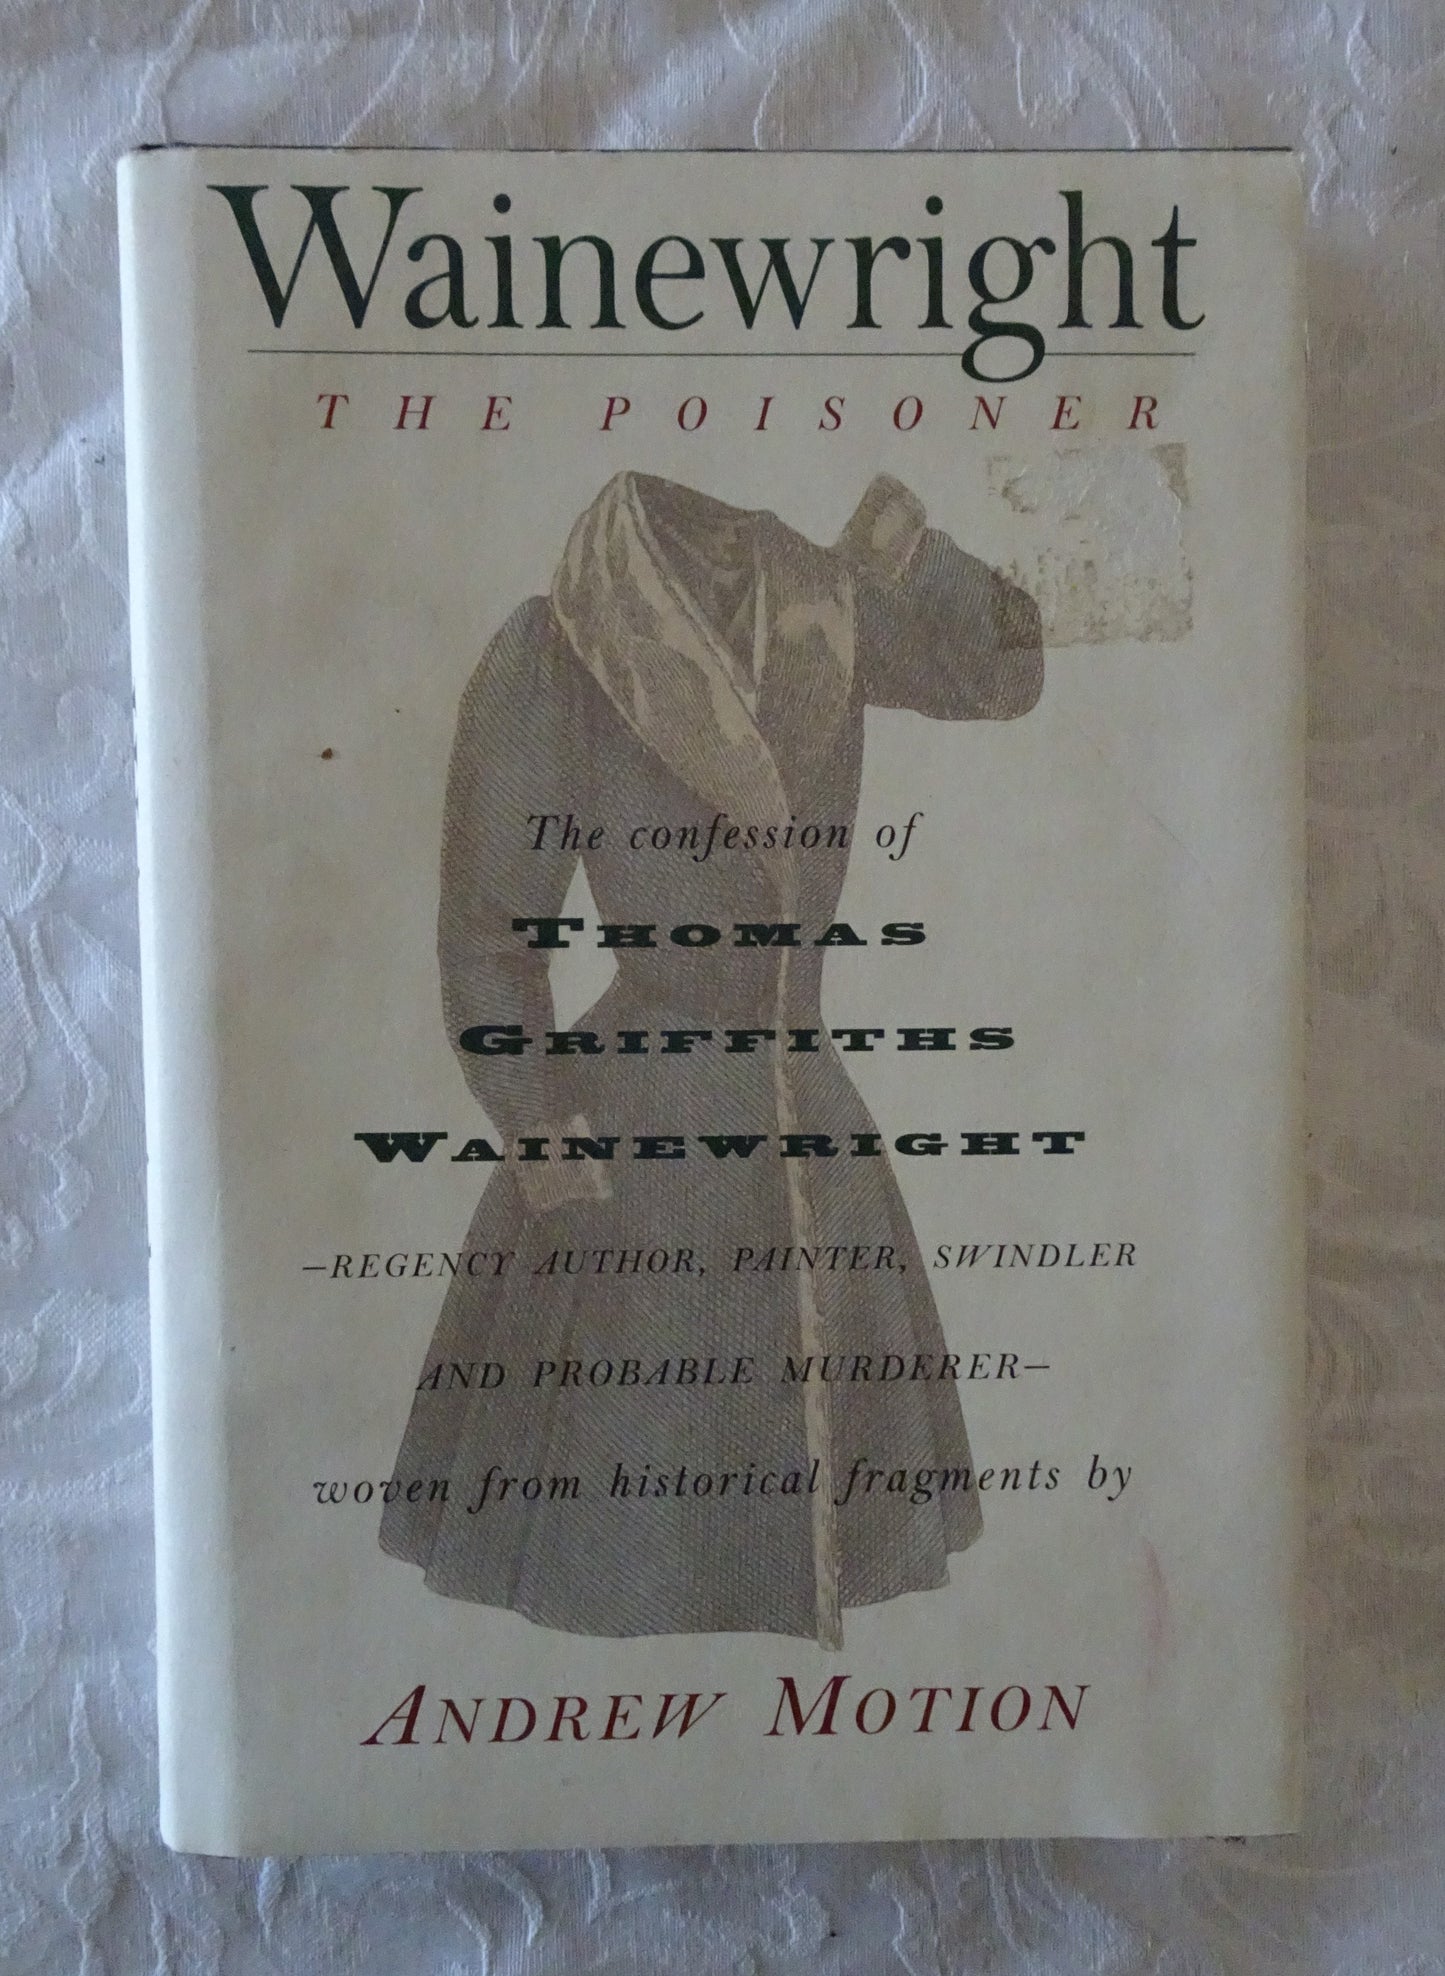 Wainewright The Poisoner by Andrew Motion